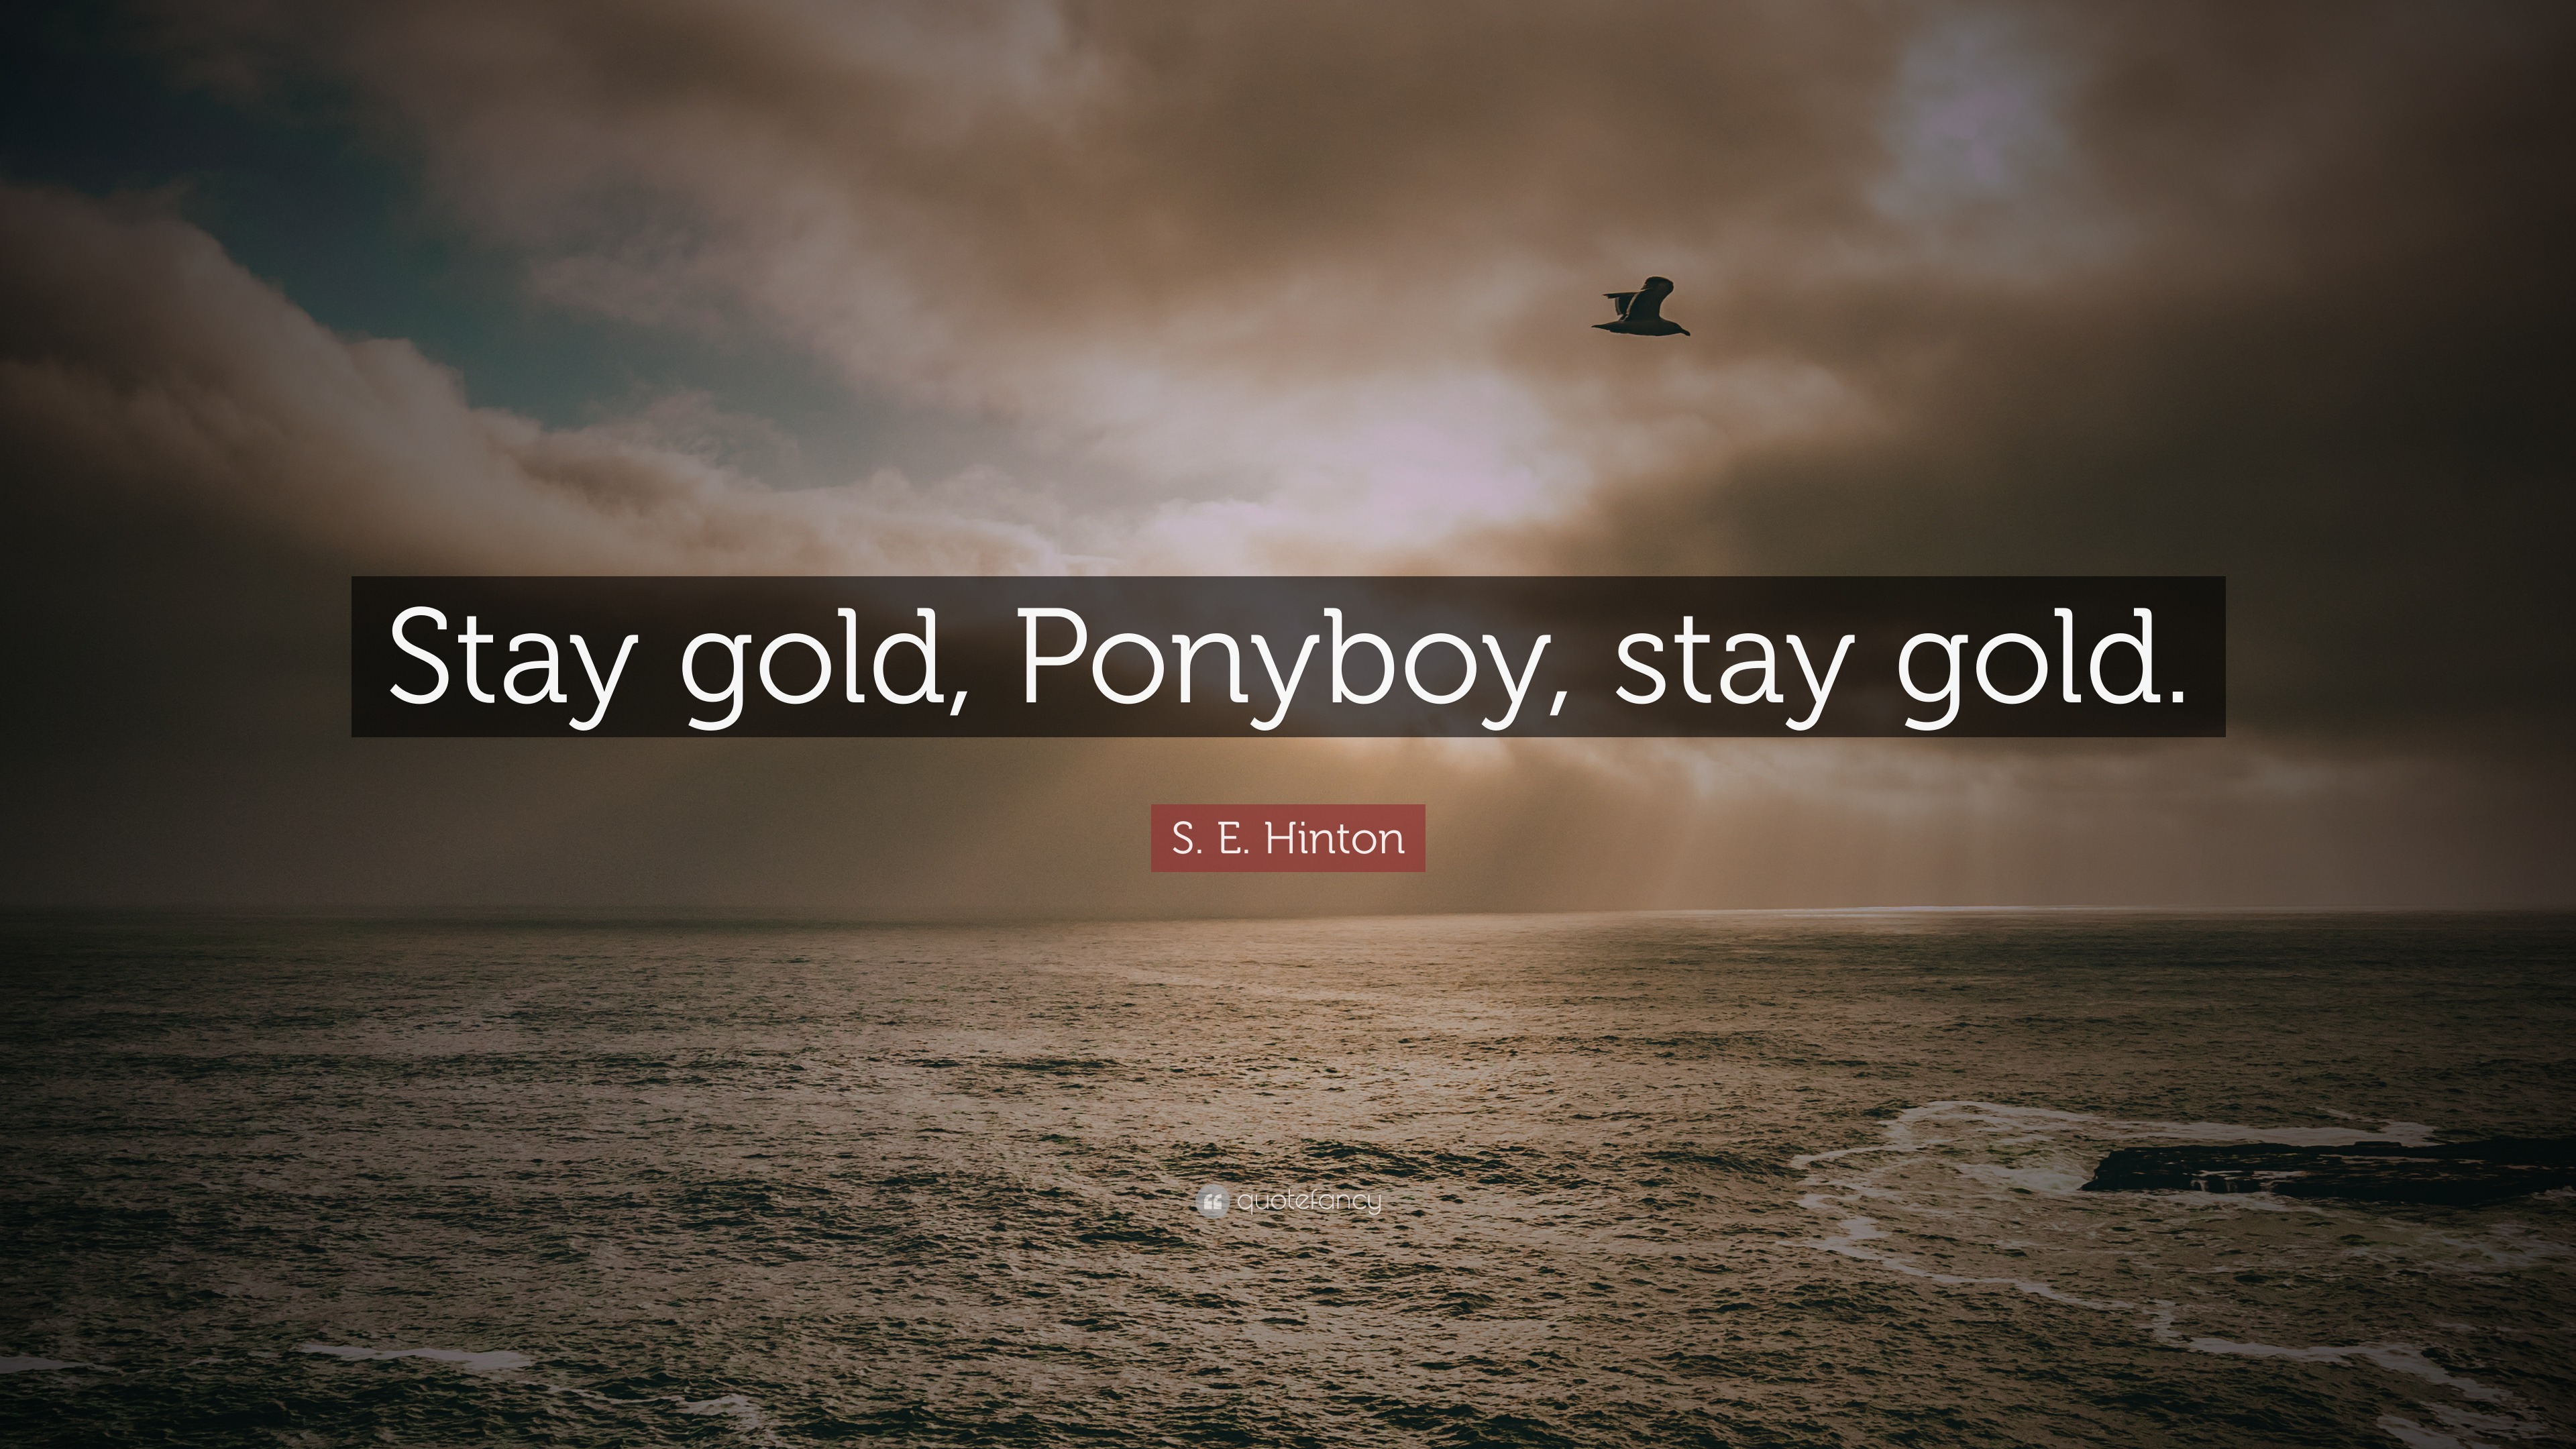 S. E. Hinton Quote: "Stay gold, Ponyboy, stay gold." (12 wallpapers) - Quotefancy